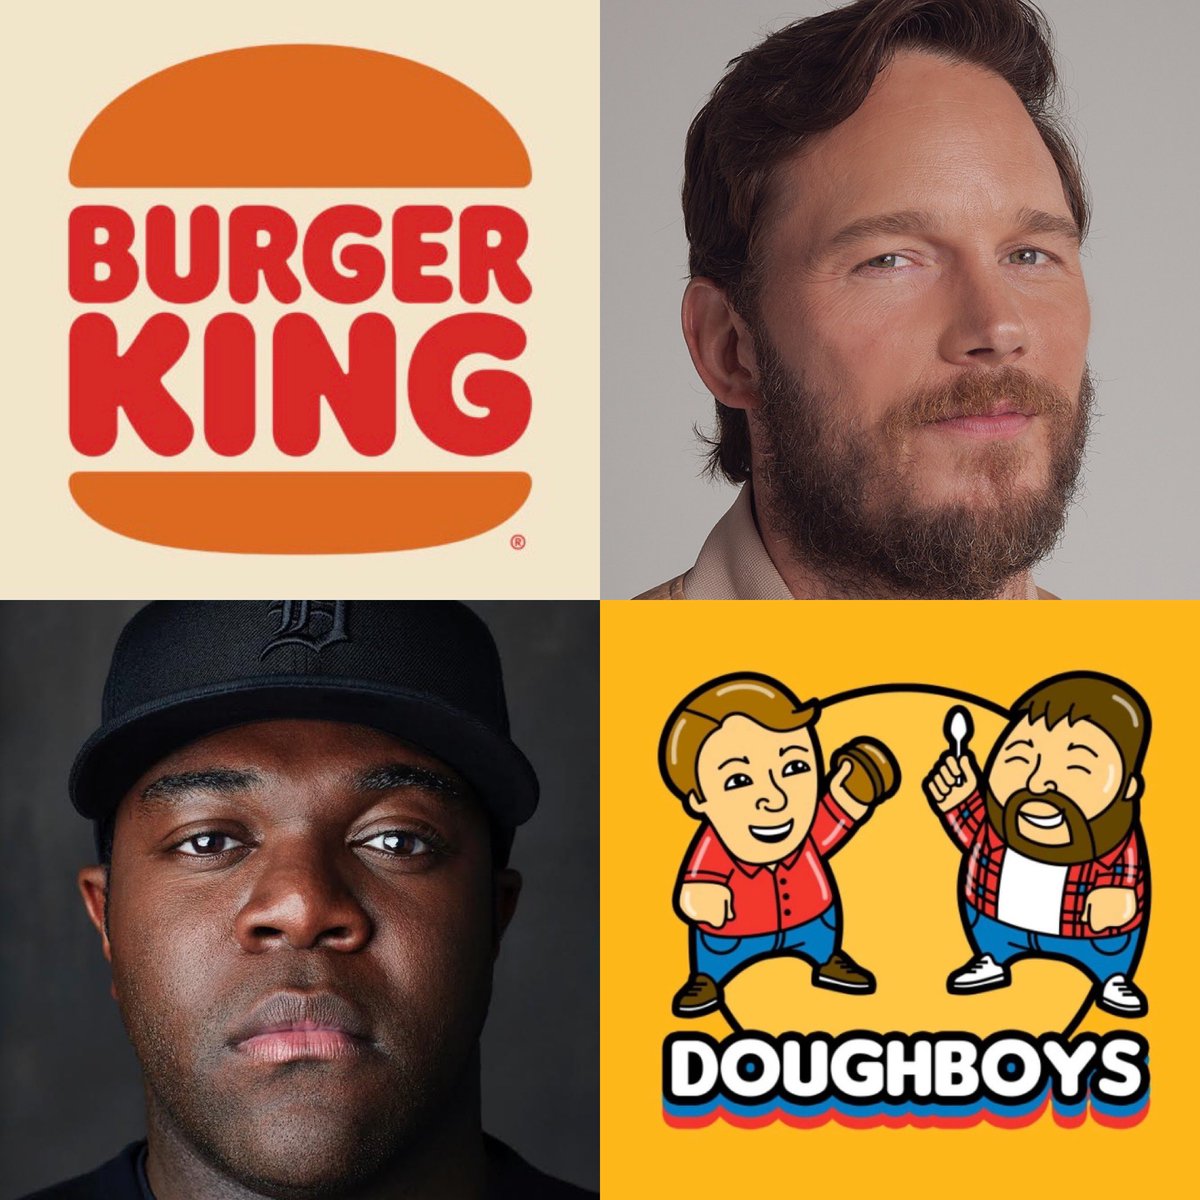 Don’t miss today’s new episode of Doughboys with Sam Richardson and an interview with Chris Pratt! headgum.com/doughboys/burg…